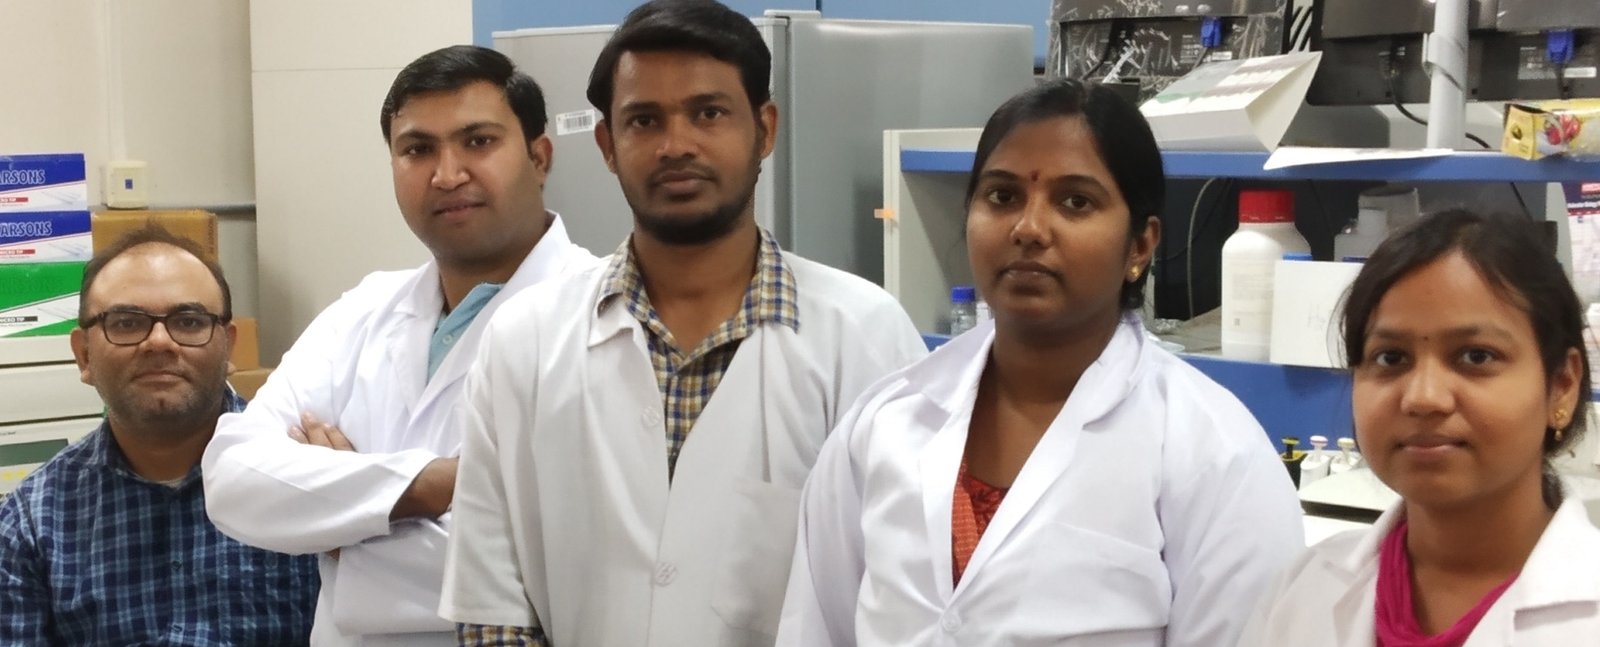 Dr. Anindya Roy (L), Associate Professor, Dept of Biotechnology, IIT Hyderabad, with his Research Team at a laboratory in IIT Hyderabad.